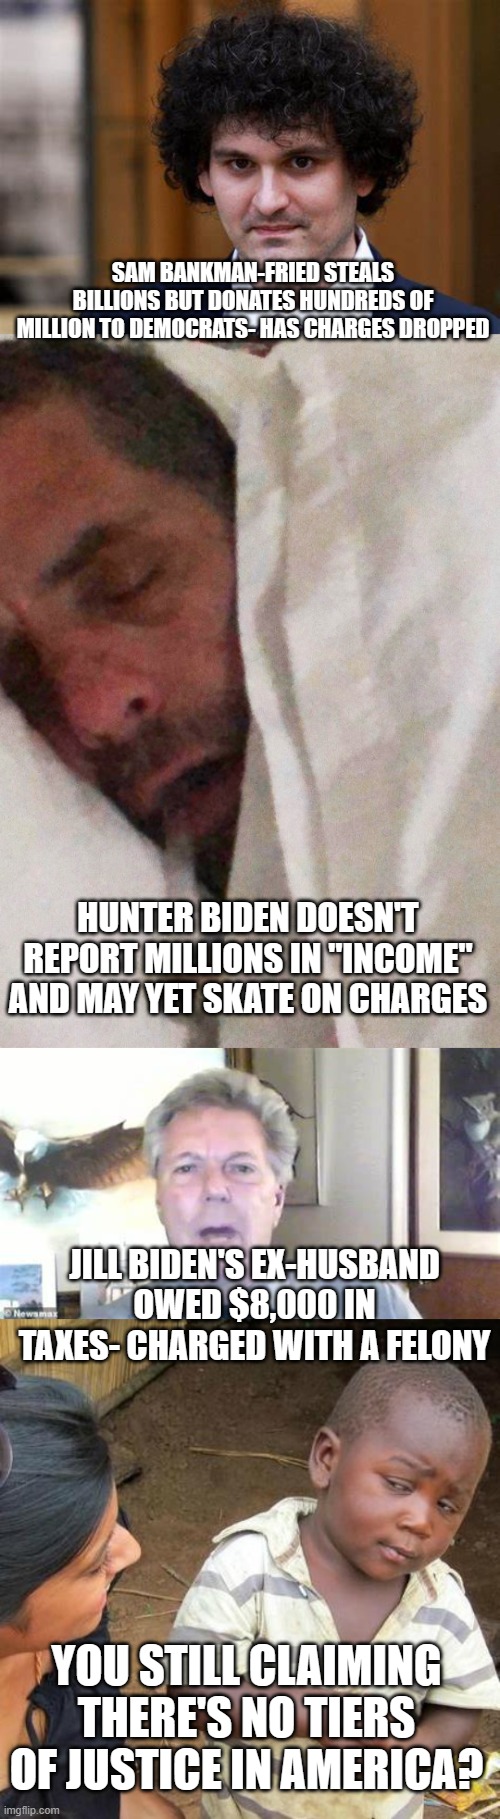 SAM BANKMAN-FRIED STEALS BILLIONS BUT DONATES HUNDREDS OF MILLION TO DEMOCRATS- HAS CHARGES DROPPED; HUNTER BIDEN DOESN'T REPORT MILLIONS IN "INCOME" AND MAY YET SKATE ON CHARGES; JILL BIDEN'S EX-HUSBAND OWED $8,000 IN TAXES- CHARGED WITH A FELONY; YOU STILL CLAIMING THERE'S NO TIERS OF JUSTICE IN AMERICA? | image tagged in hunter biden cracker pipe,memes,third world skeptical kid | made w/ Imgflip meme maker